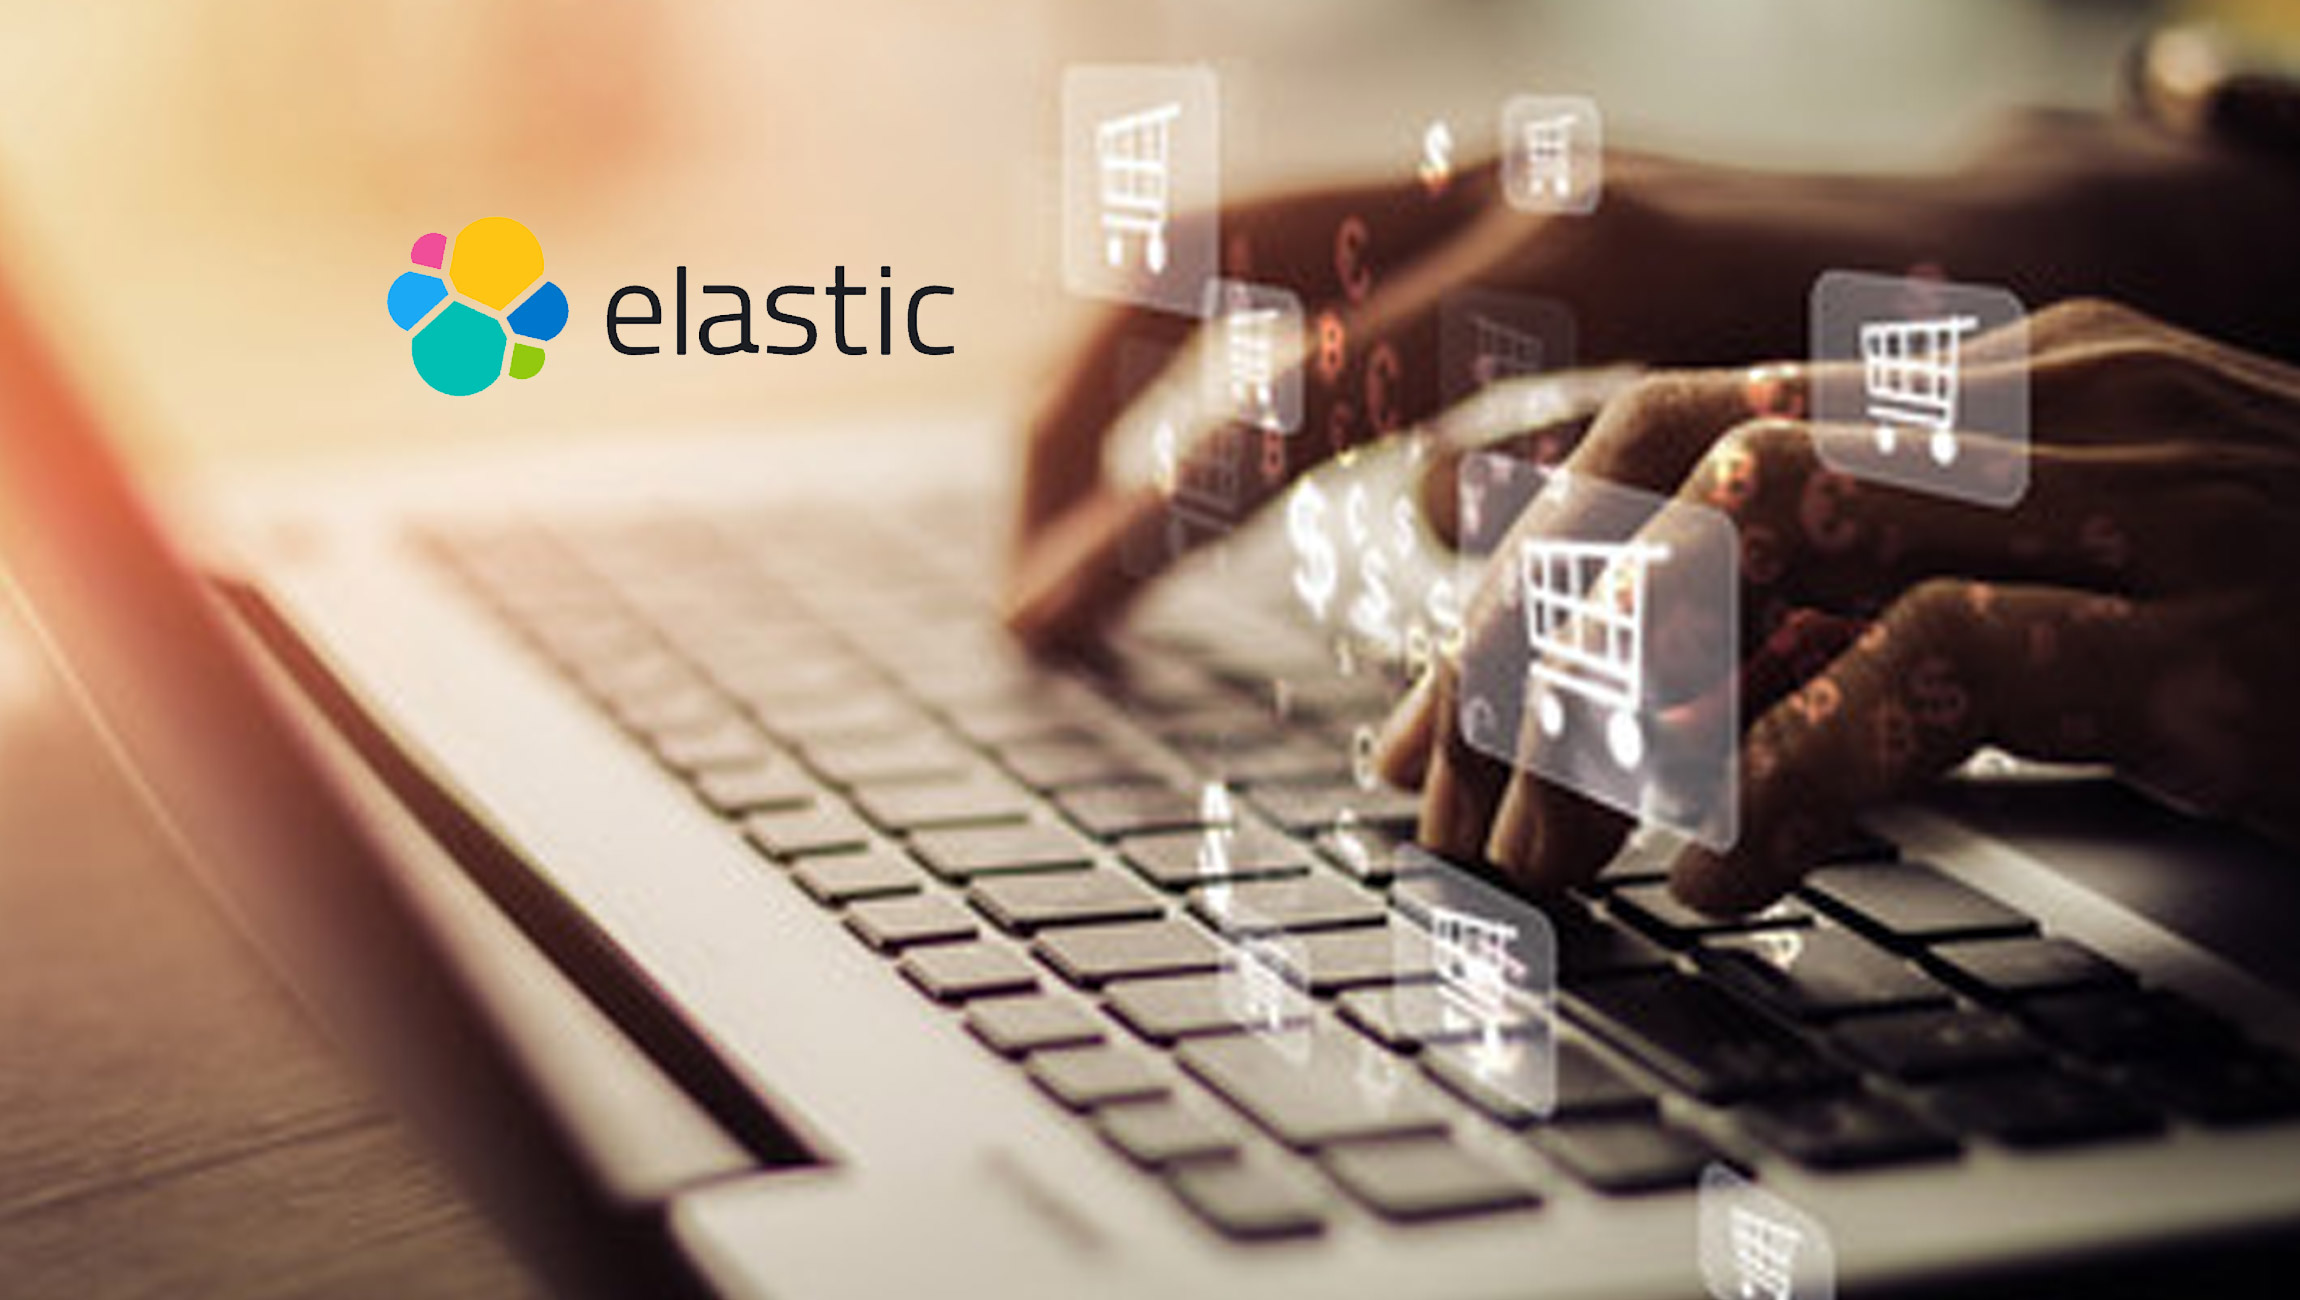 New Study From Elastic Finds 84% of Online Shoppers Say Personalization Influences Their Purchases